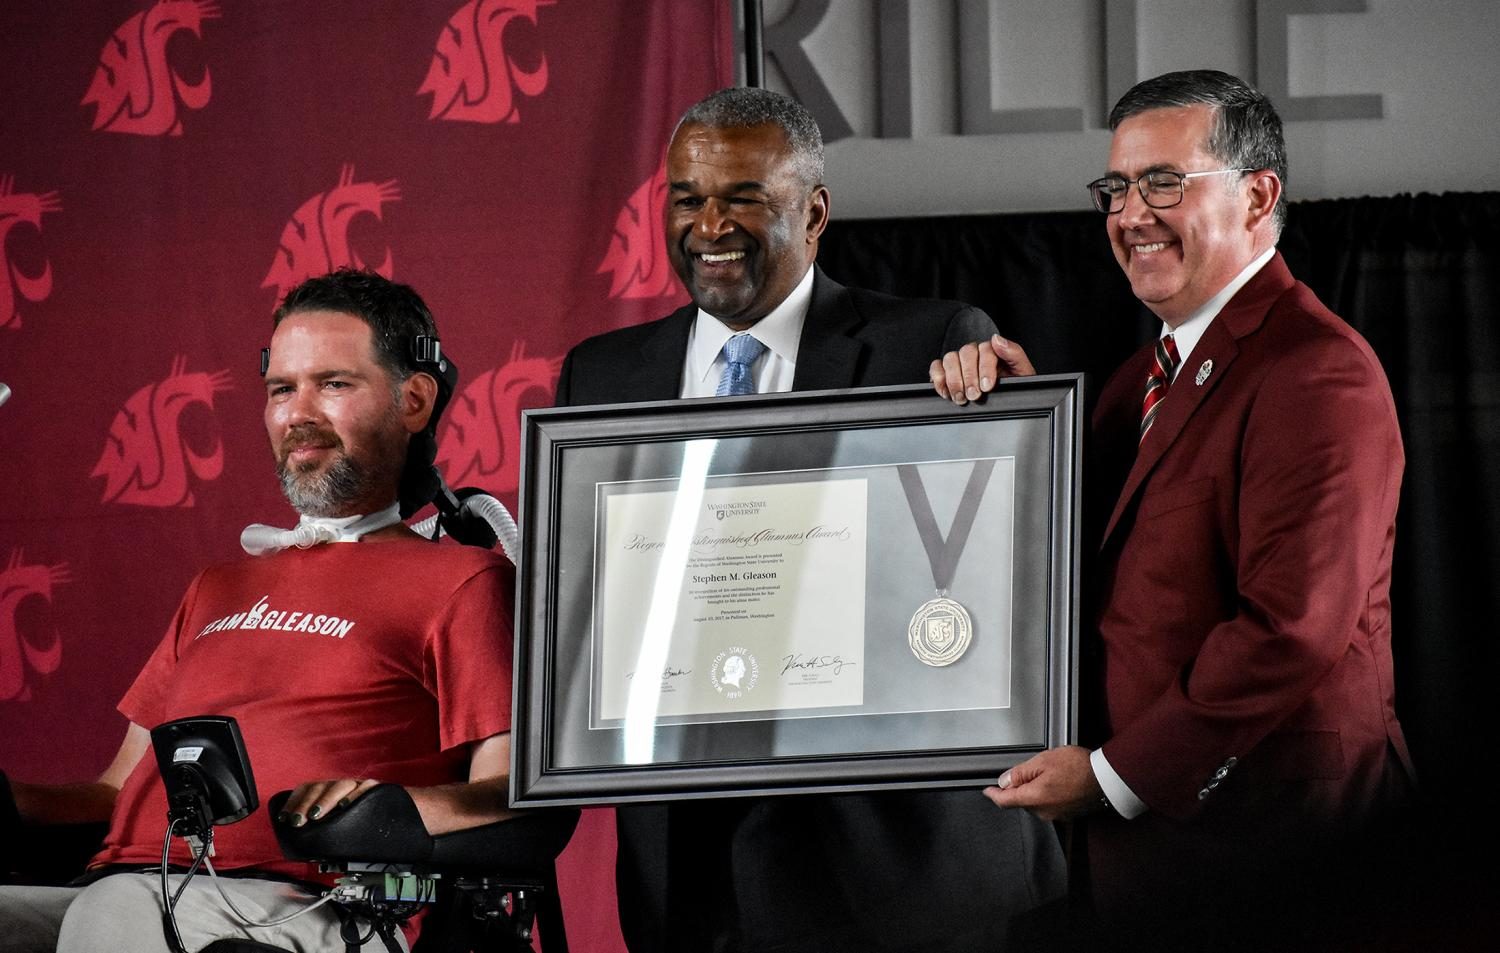 WSU+alumnus+and+former+football+player+was+presented+with+the+Regents%E2%80%99+Distinguished+Alumnus+Award+for+his+contributions+to+finding+a+cure+for+ALS.